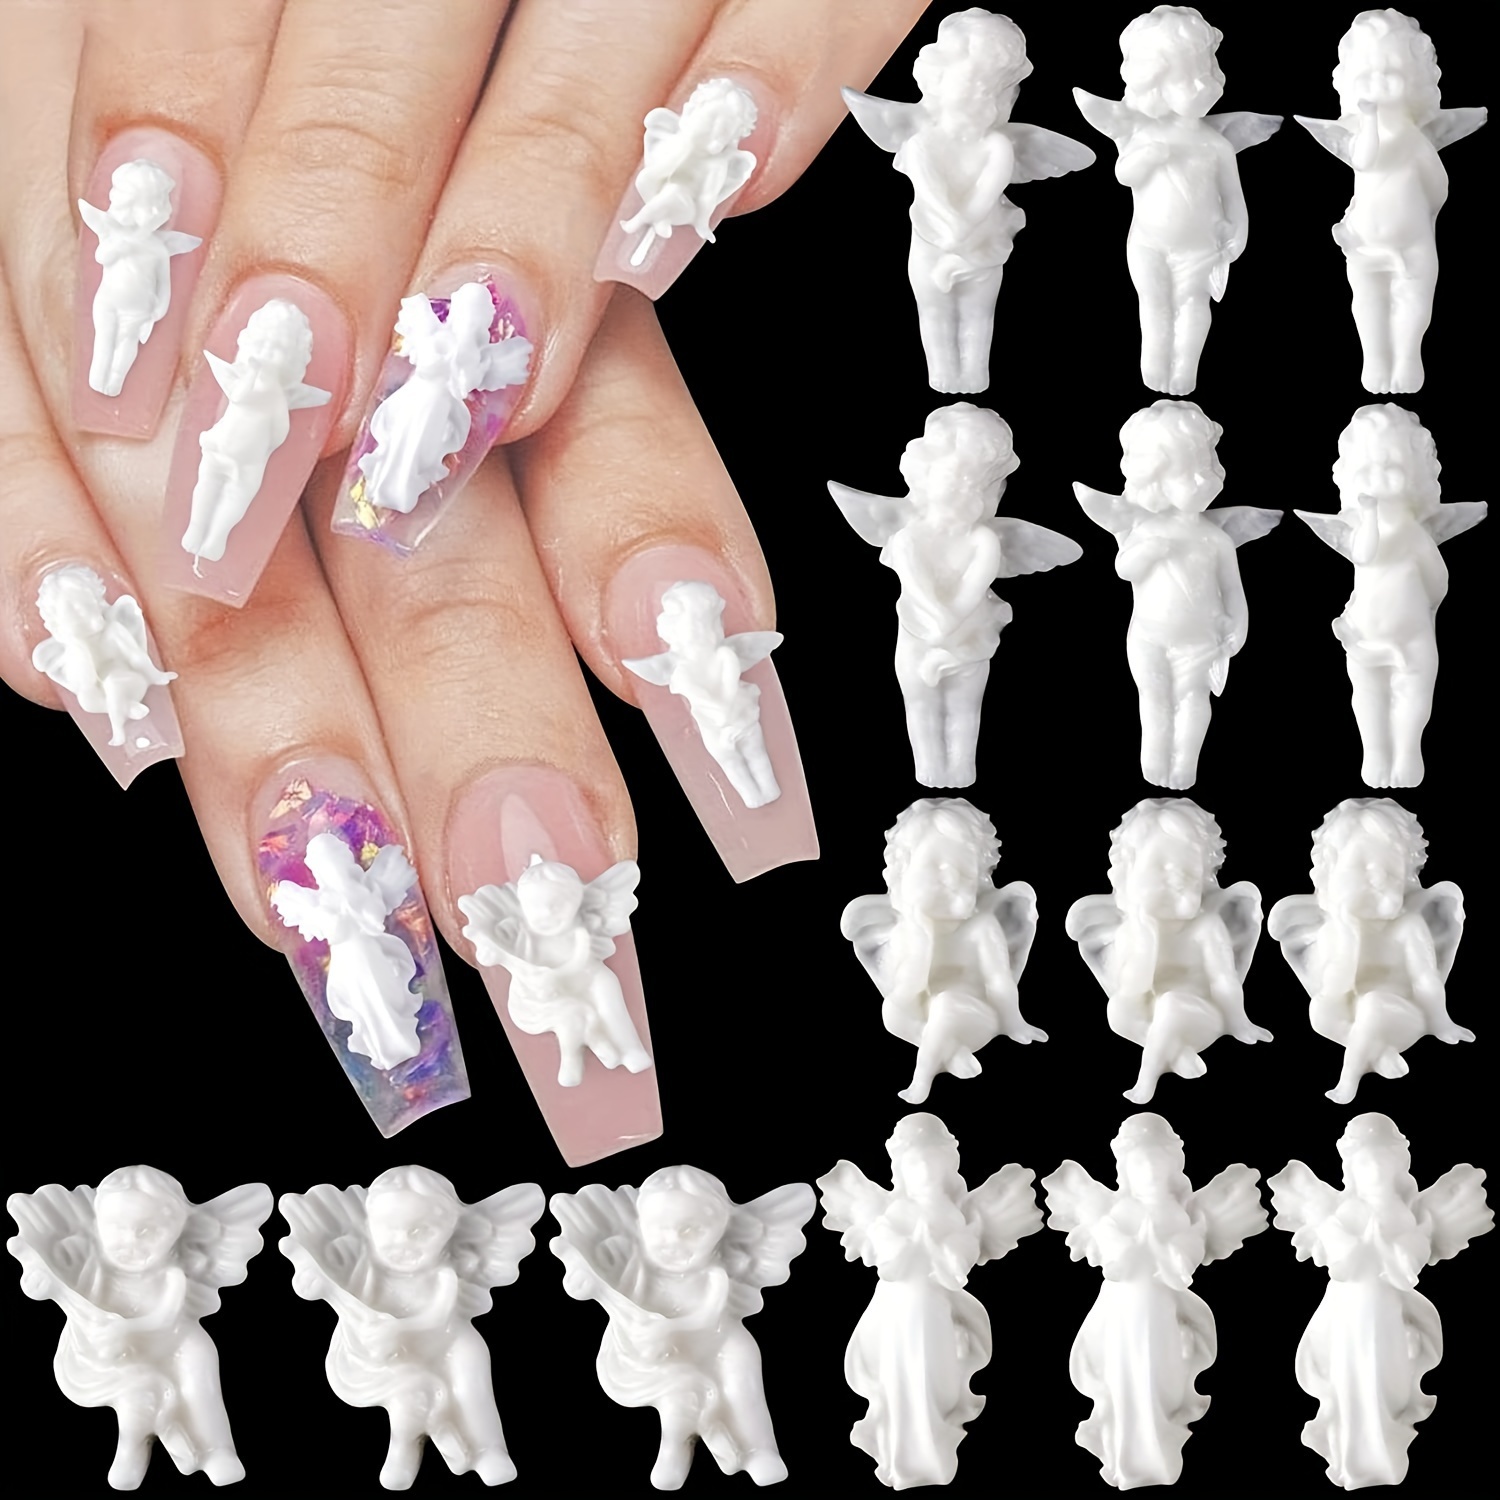 

90pcs Cute Cupid Design 3d Embossed Angel Baby Nail Art Charms For Diy Manicure Jewelry Decor - White Angel Nail Supplies